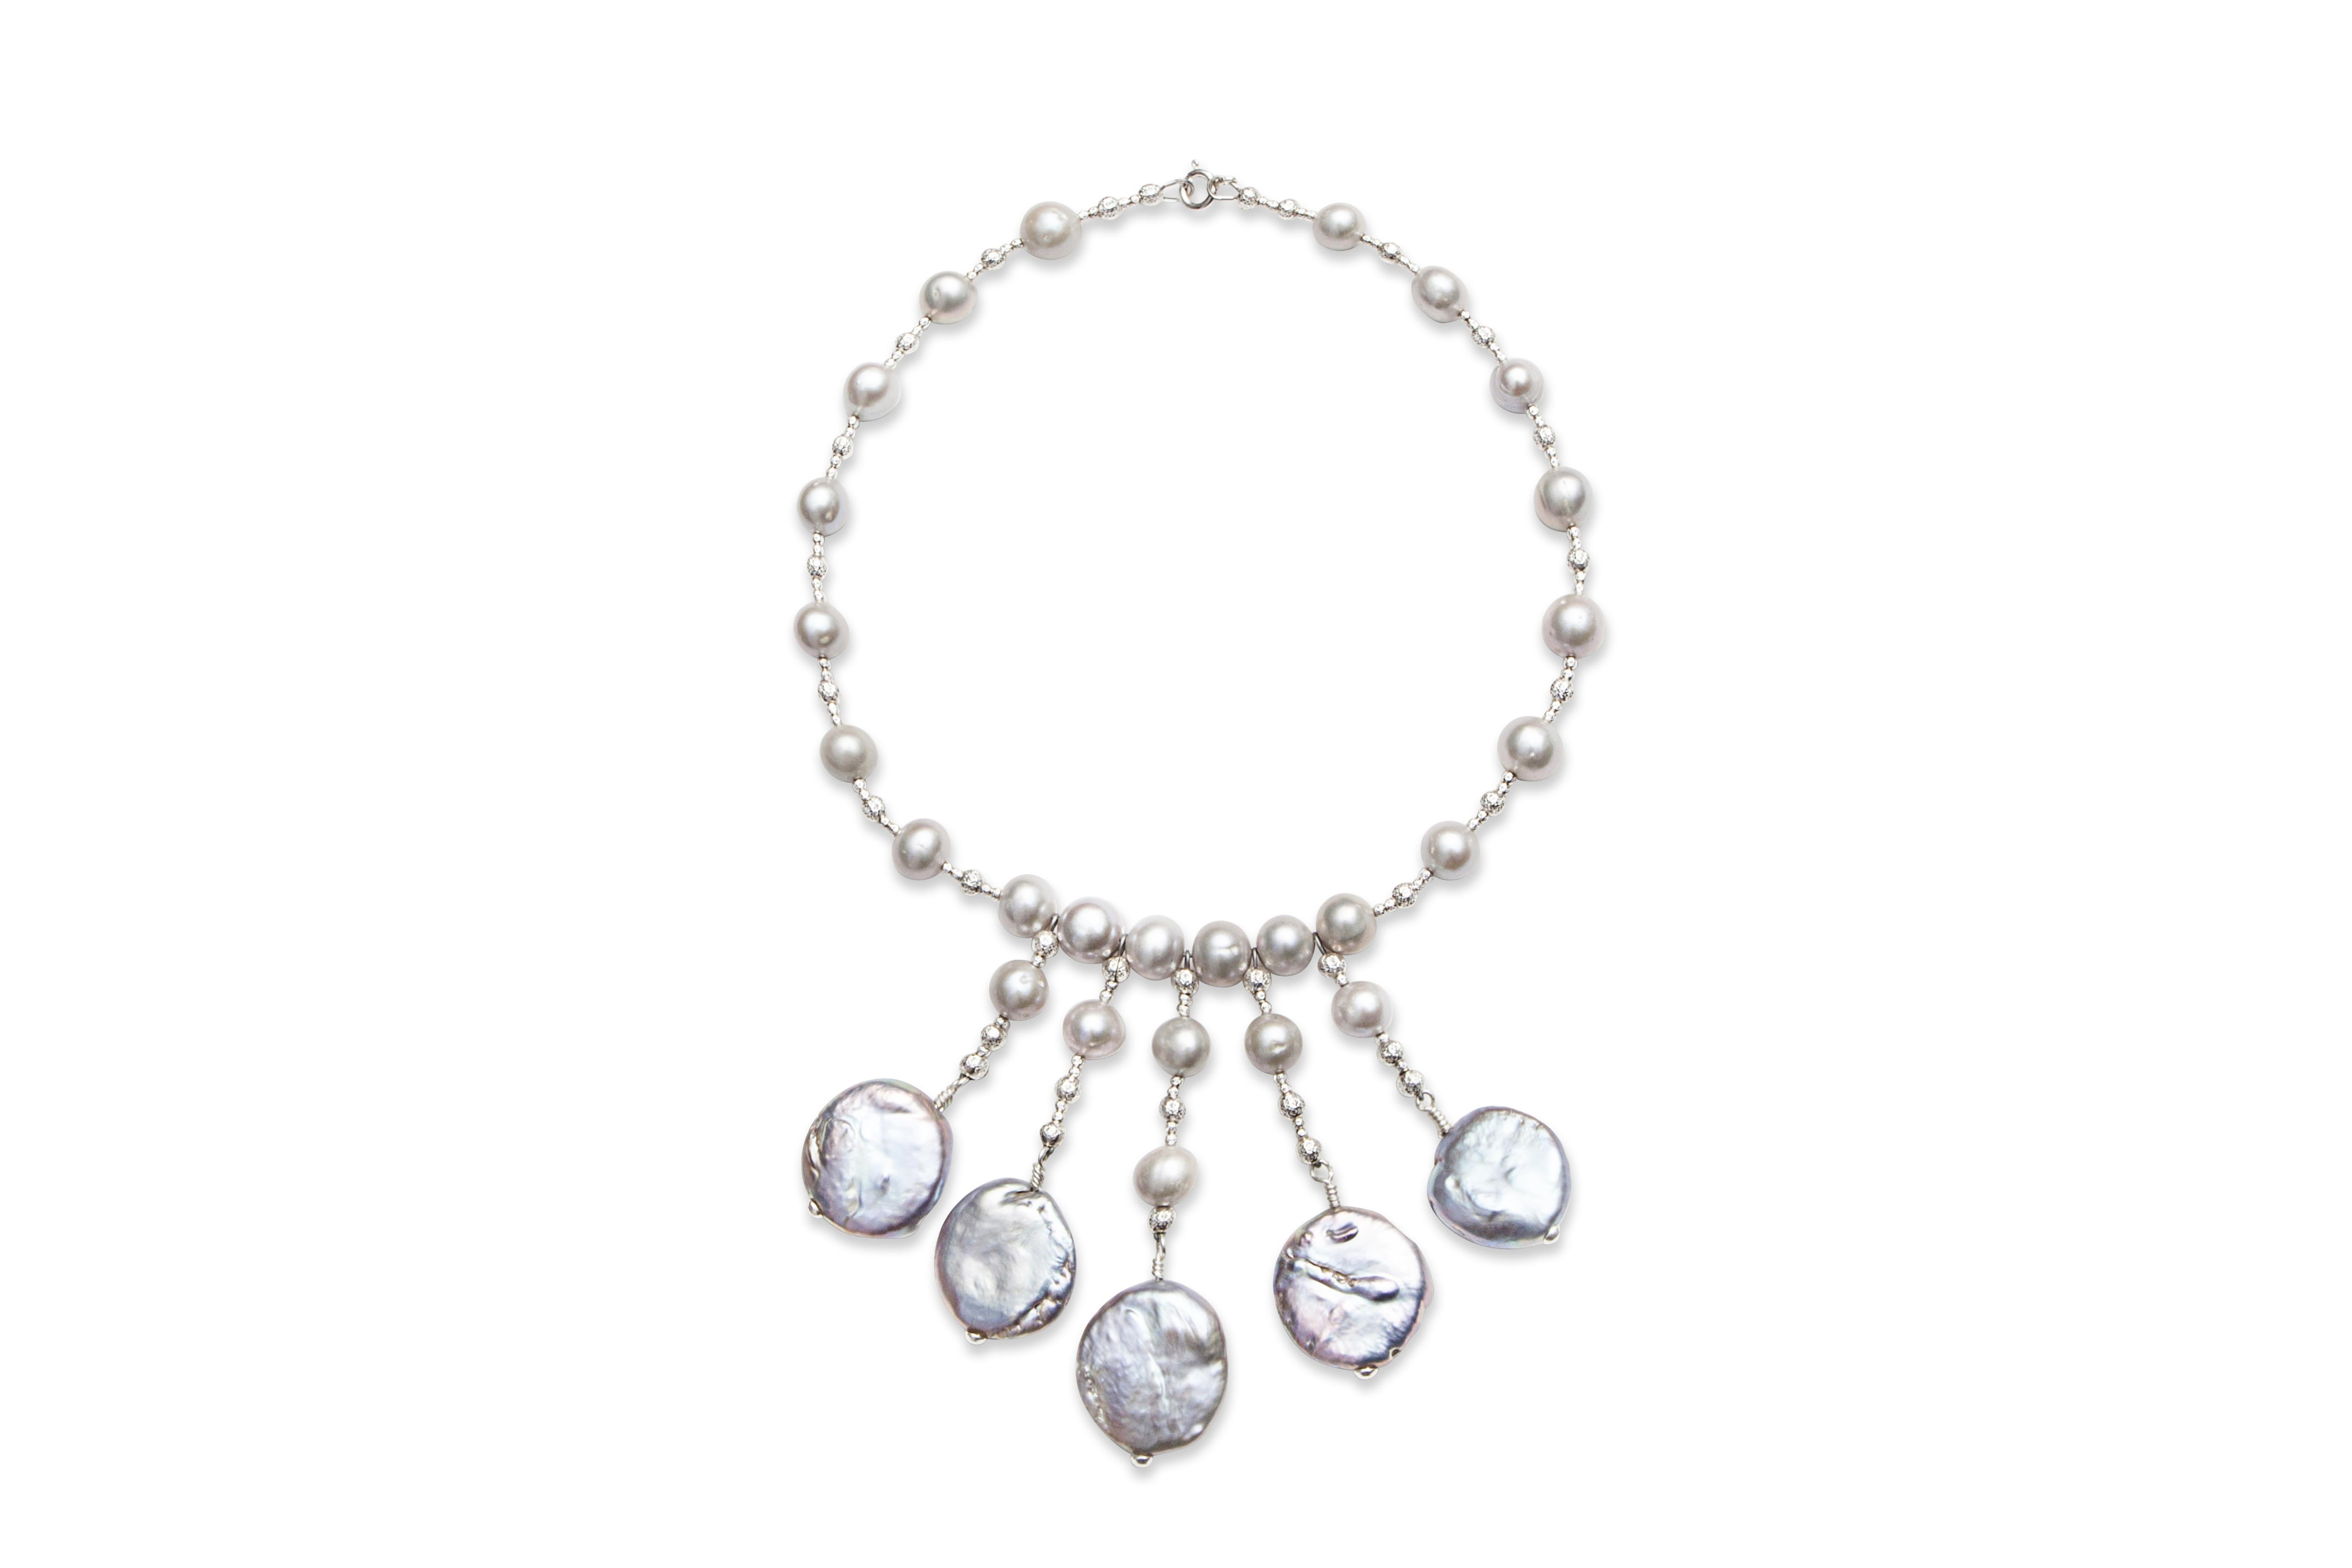 Modern Grey Pearl Necklace with Five-Coin Pearl Drops and Diamond Cut Silver Beads For Sale